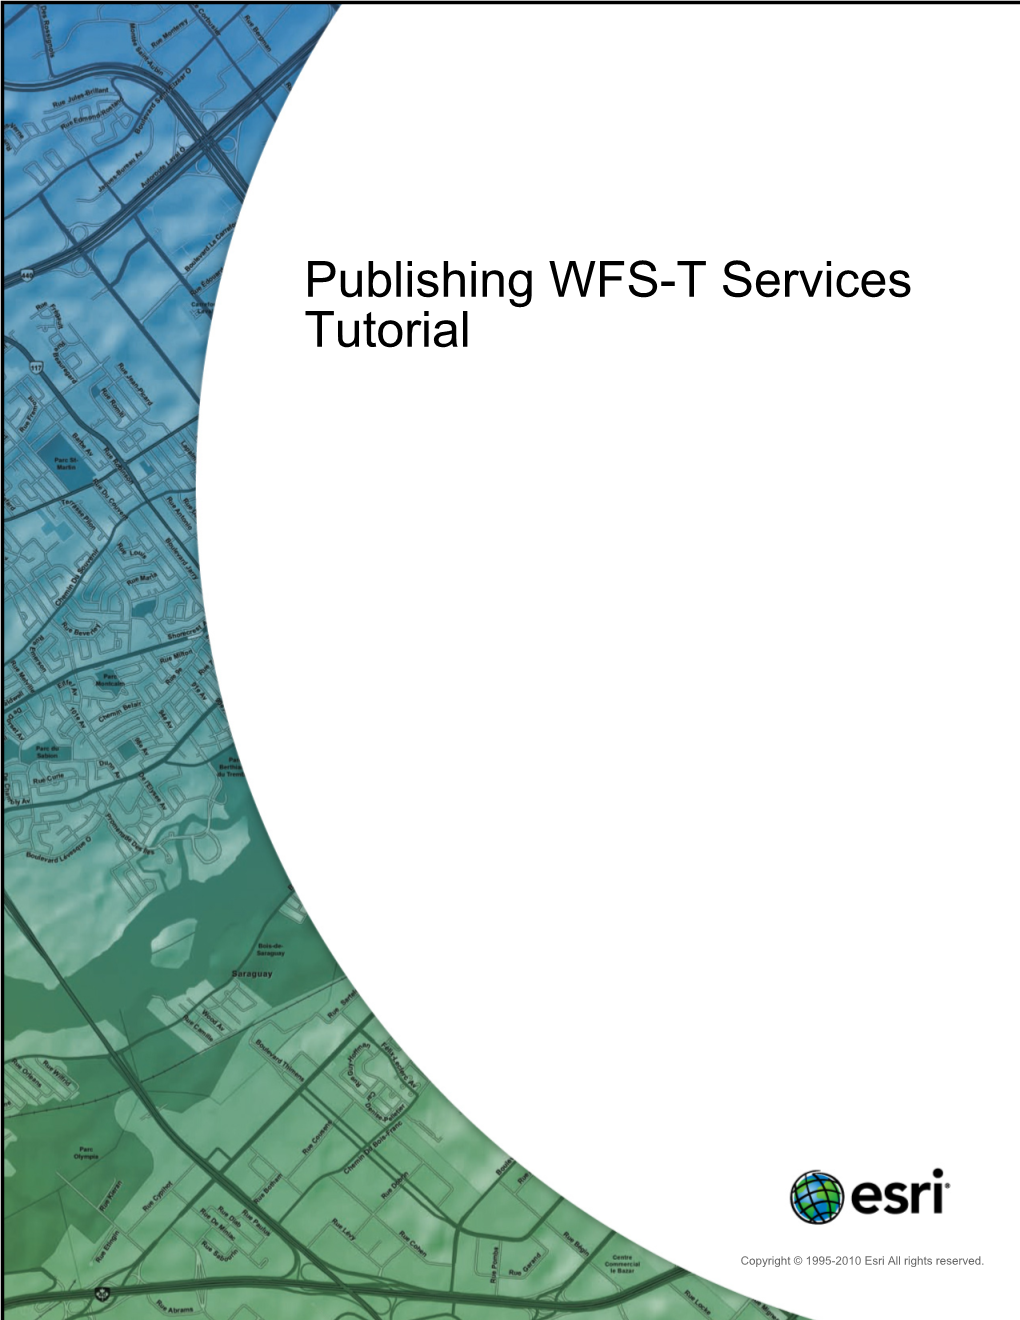 Publishing WFS-T Services Tutorial